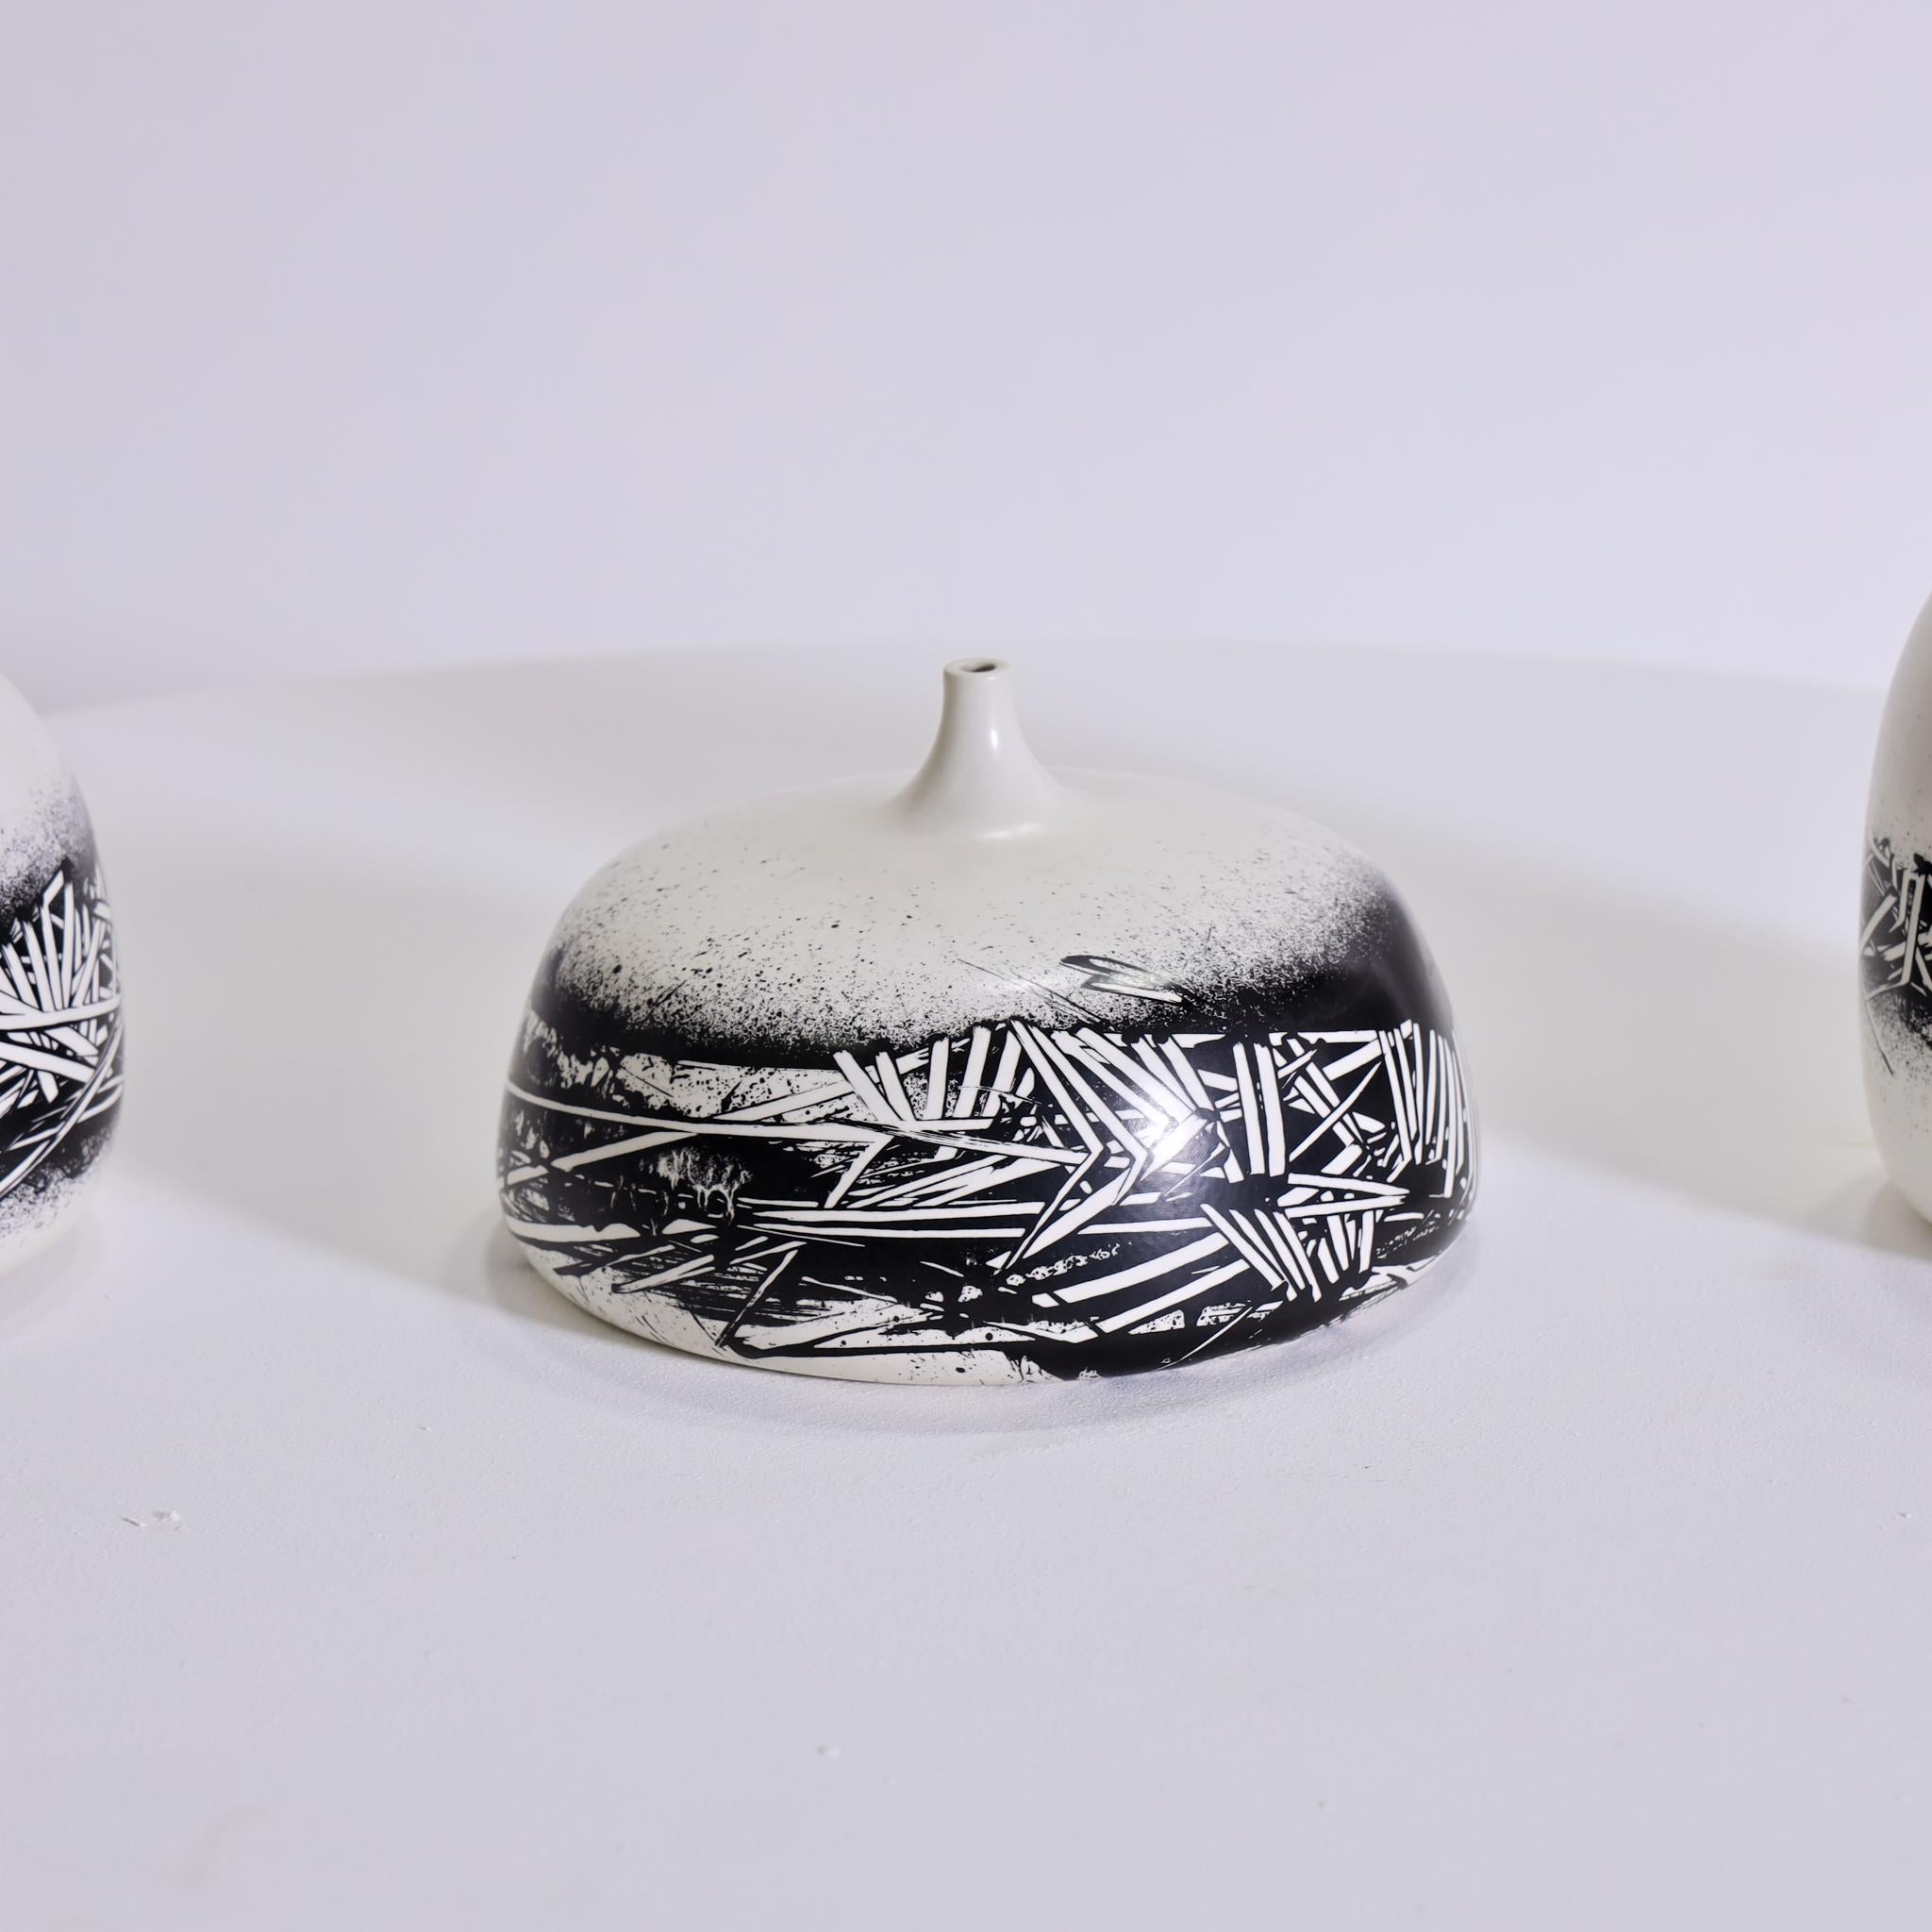 Set of Three Ceramic Vases by Emilio Scanavino for Motta In Good Condition For Sale In New York, NY